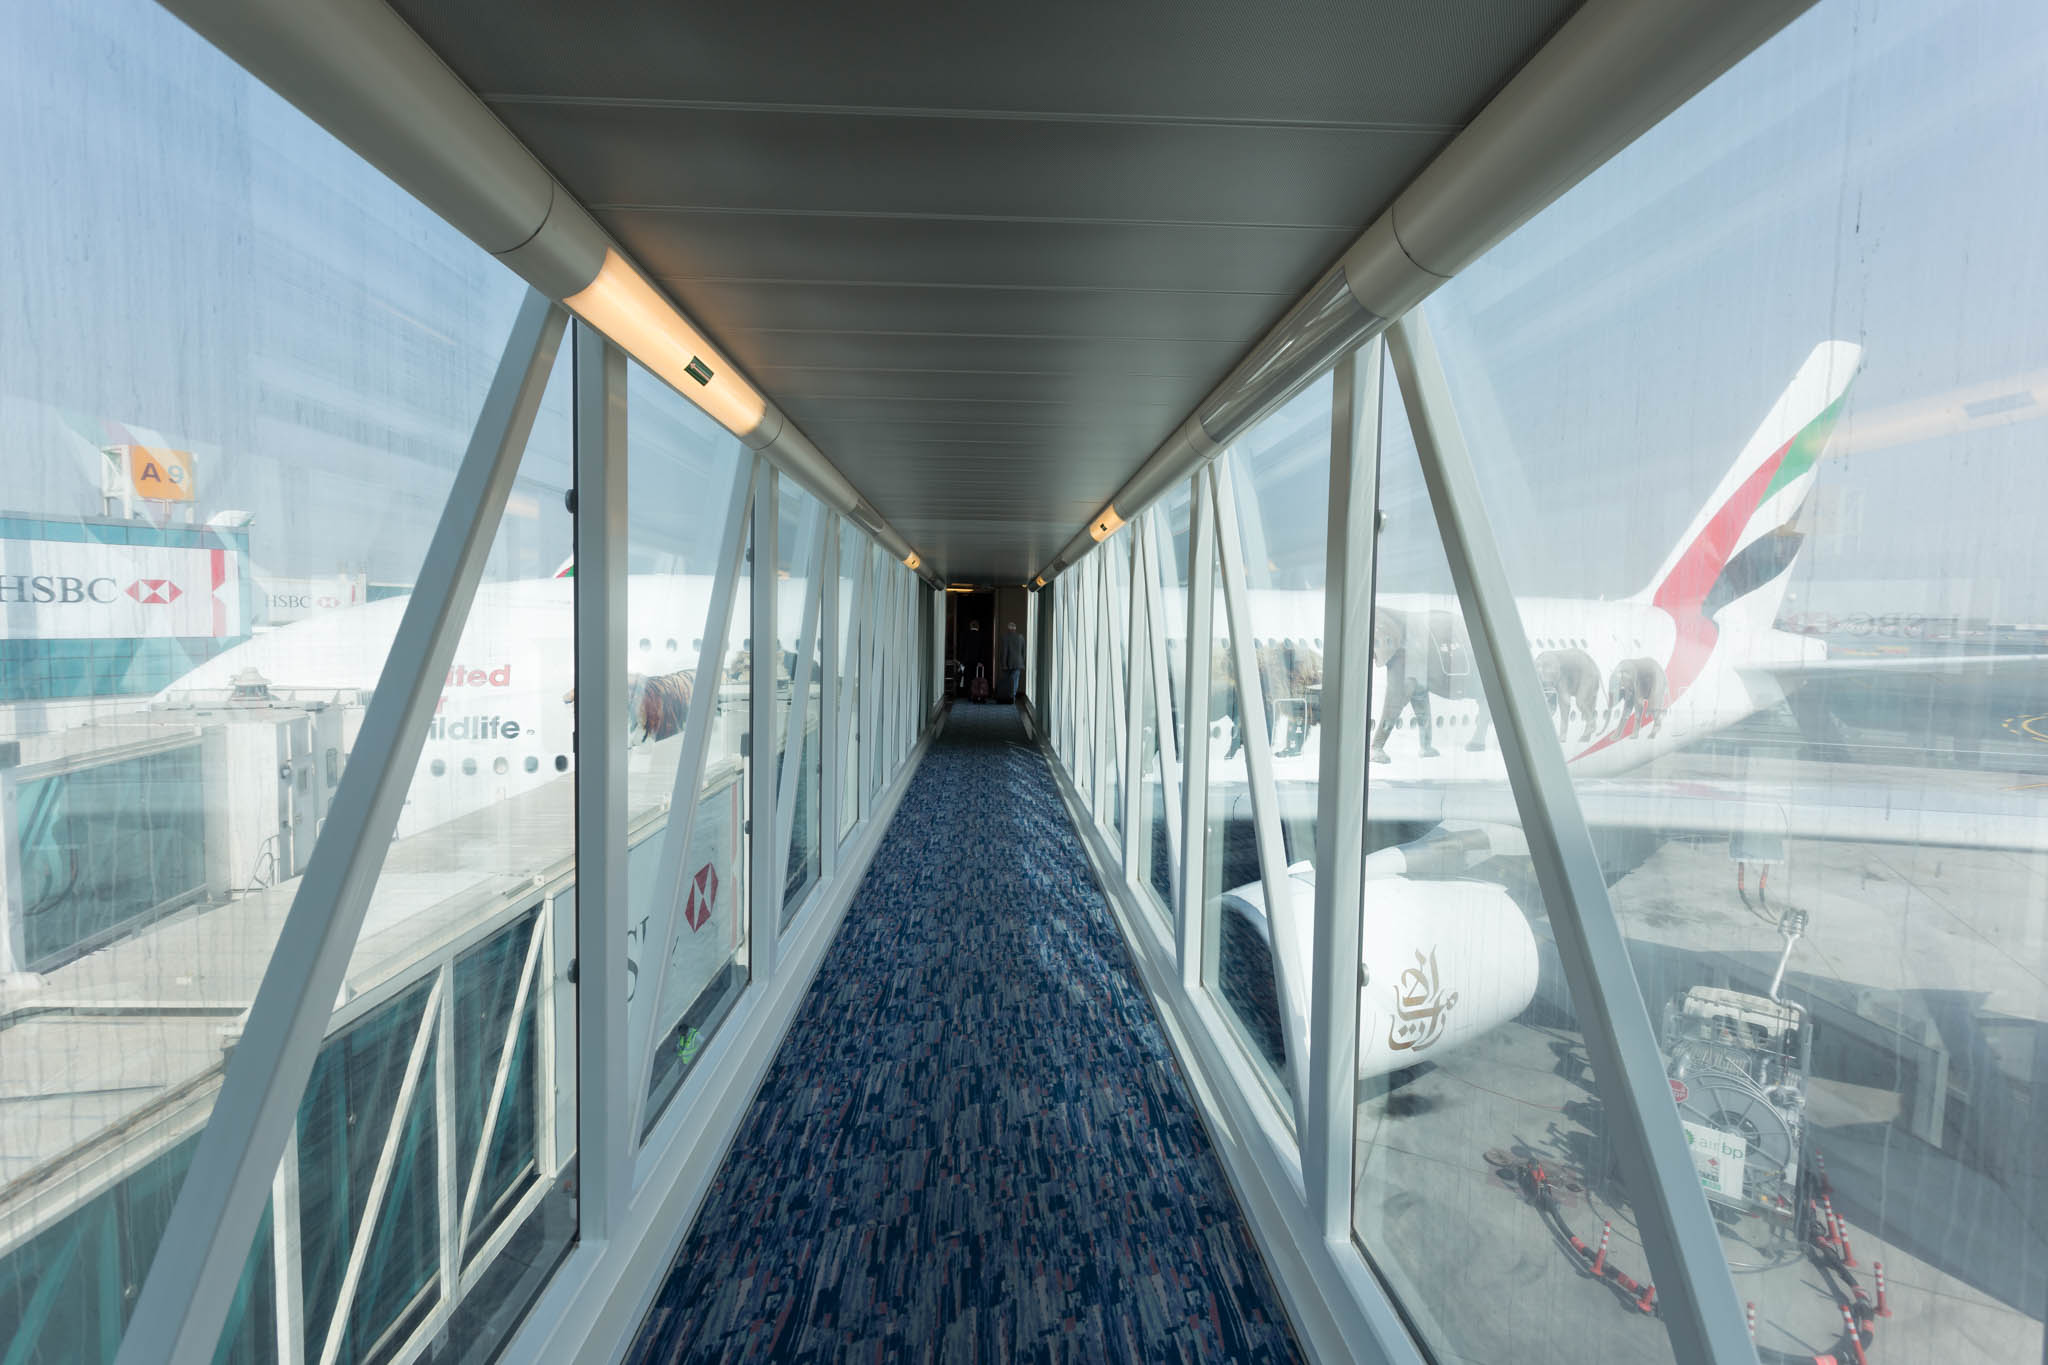 a long hallway with windows and a plane in the background